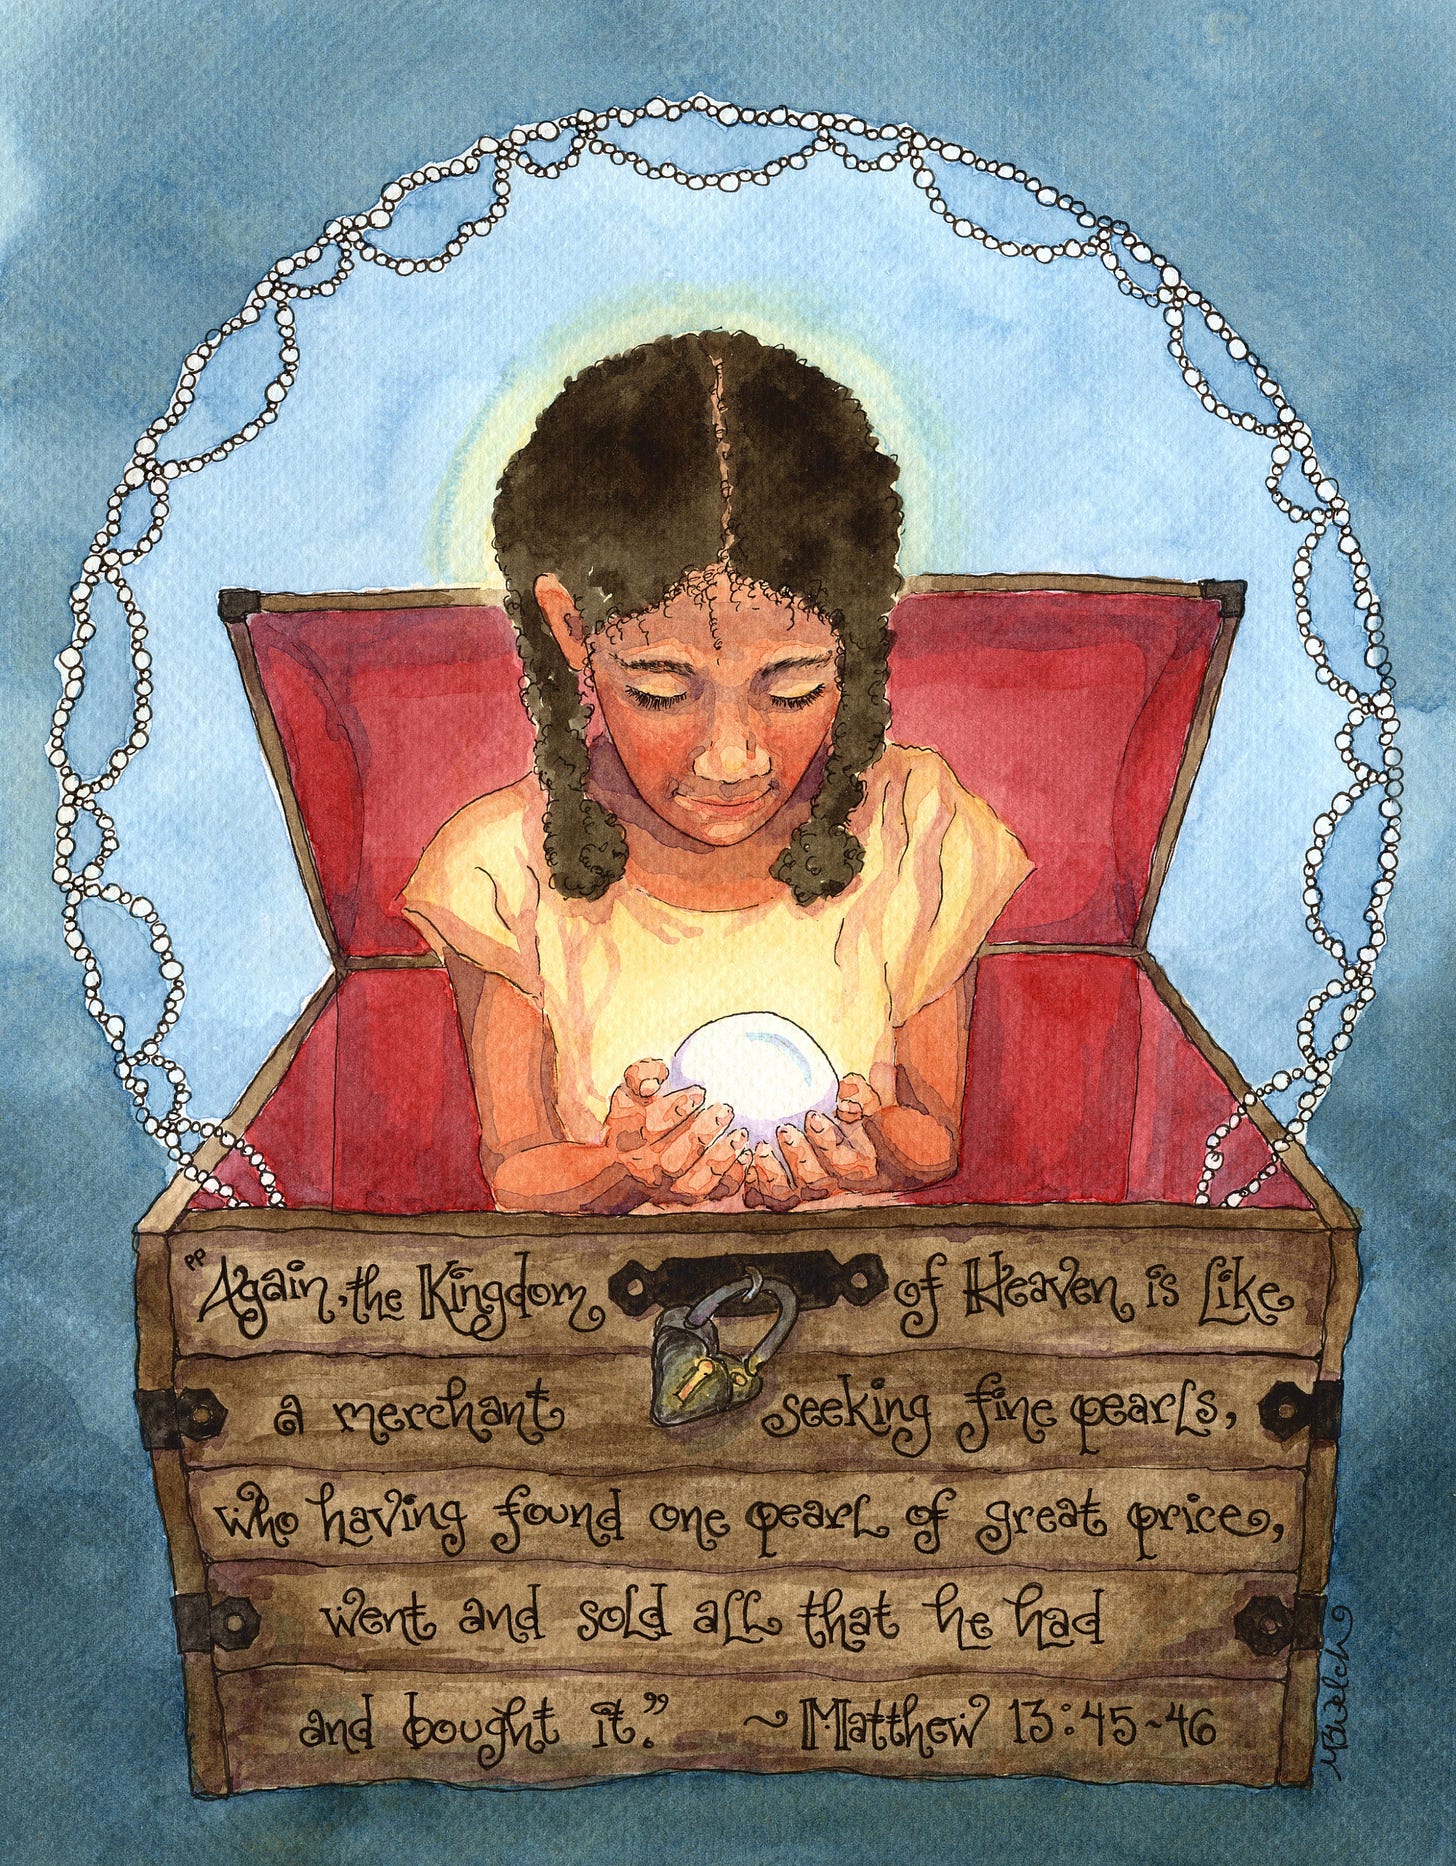 A girl with light brown skin and dark brown hair sits in a red chest while holding a large peal in her hands. The chest is inscribed with the text of the Parable of the Great Pearl from the Gospel of Matthew.